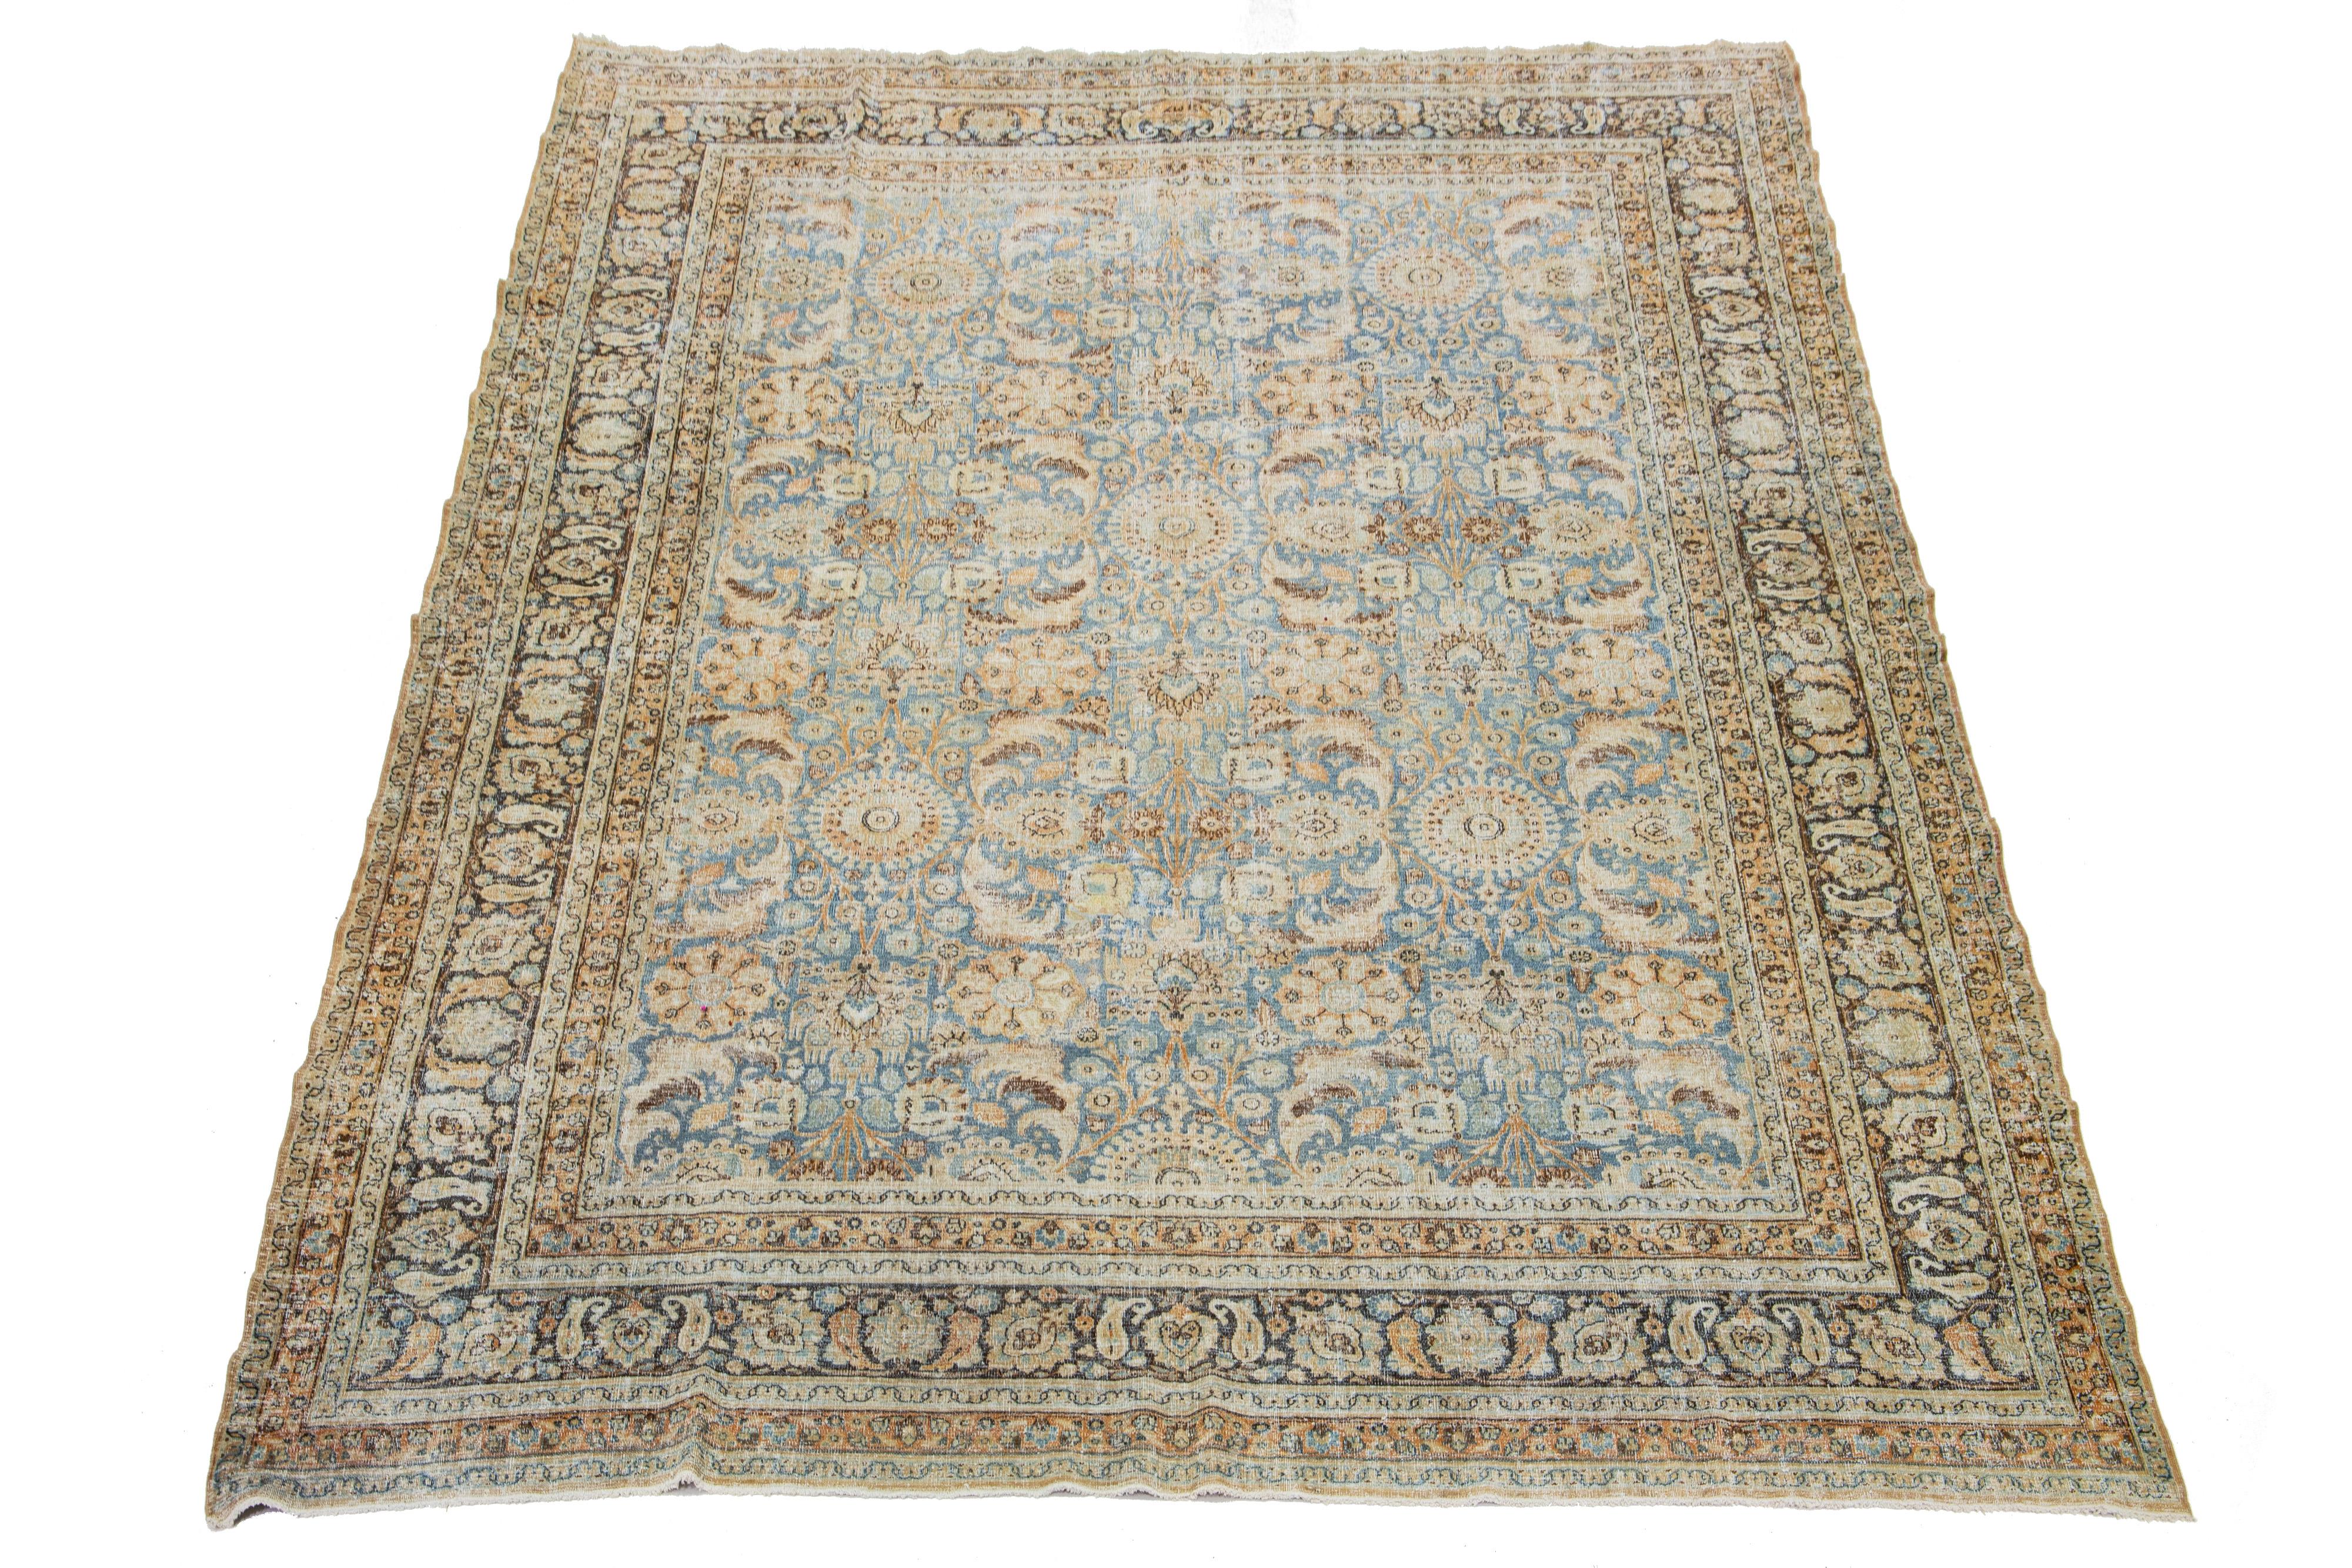 This Persian Tabriz wool rug, handcrafted, showcases a traditional floral pattern. The contrast between the blue backdrop and the peach and brown emphasizes the design.

This rug measures 10' X 13'4